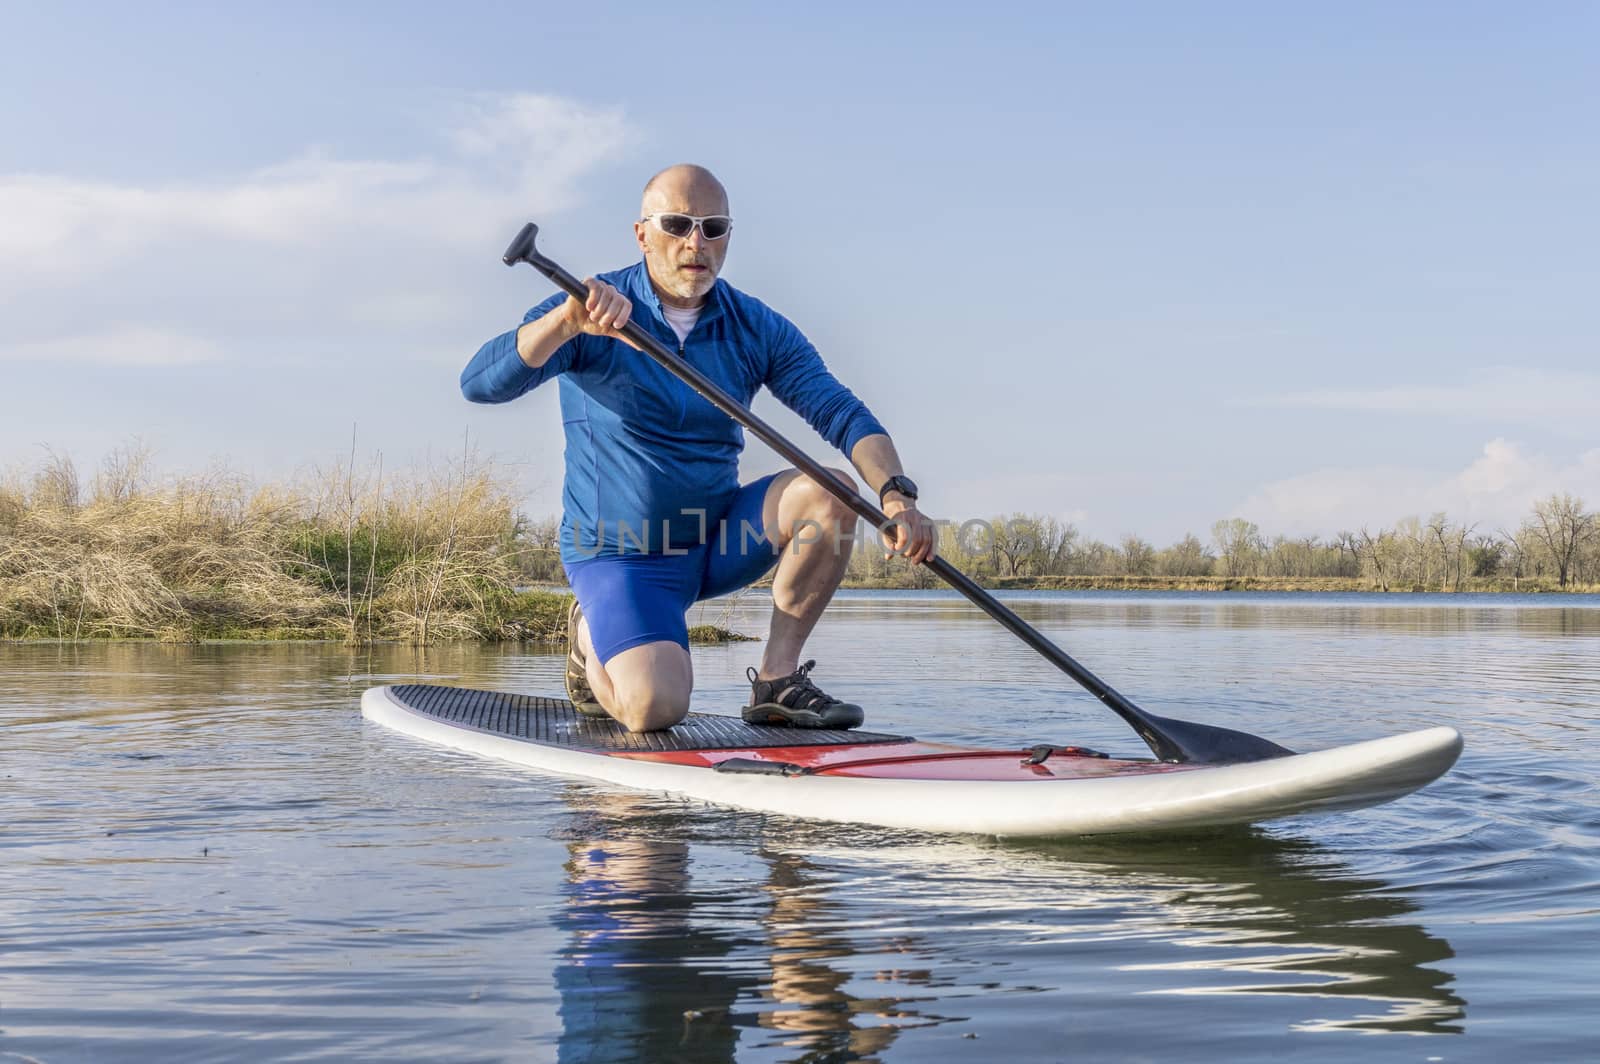 Senior male on stand up paddling (SUP) board. Early spring on calm lake in Colorado.